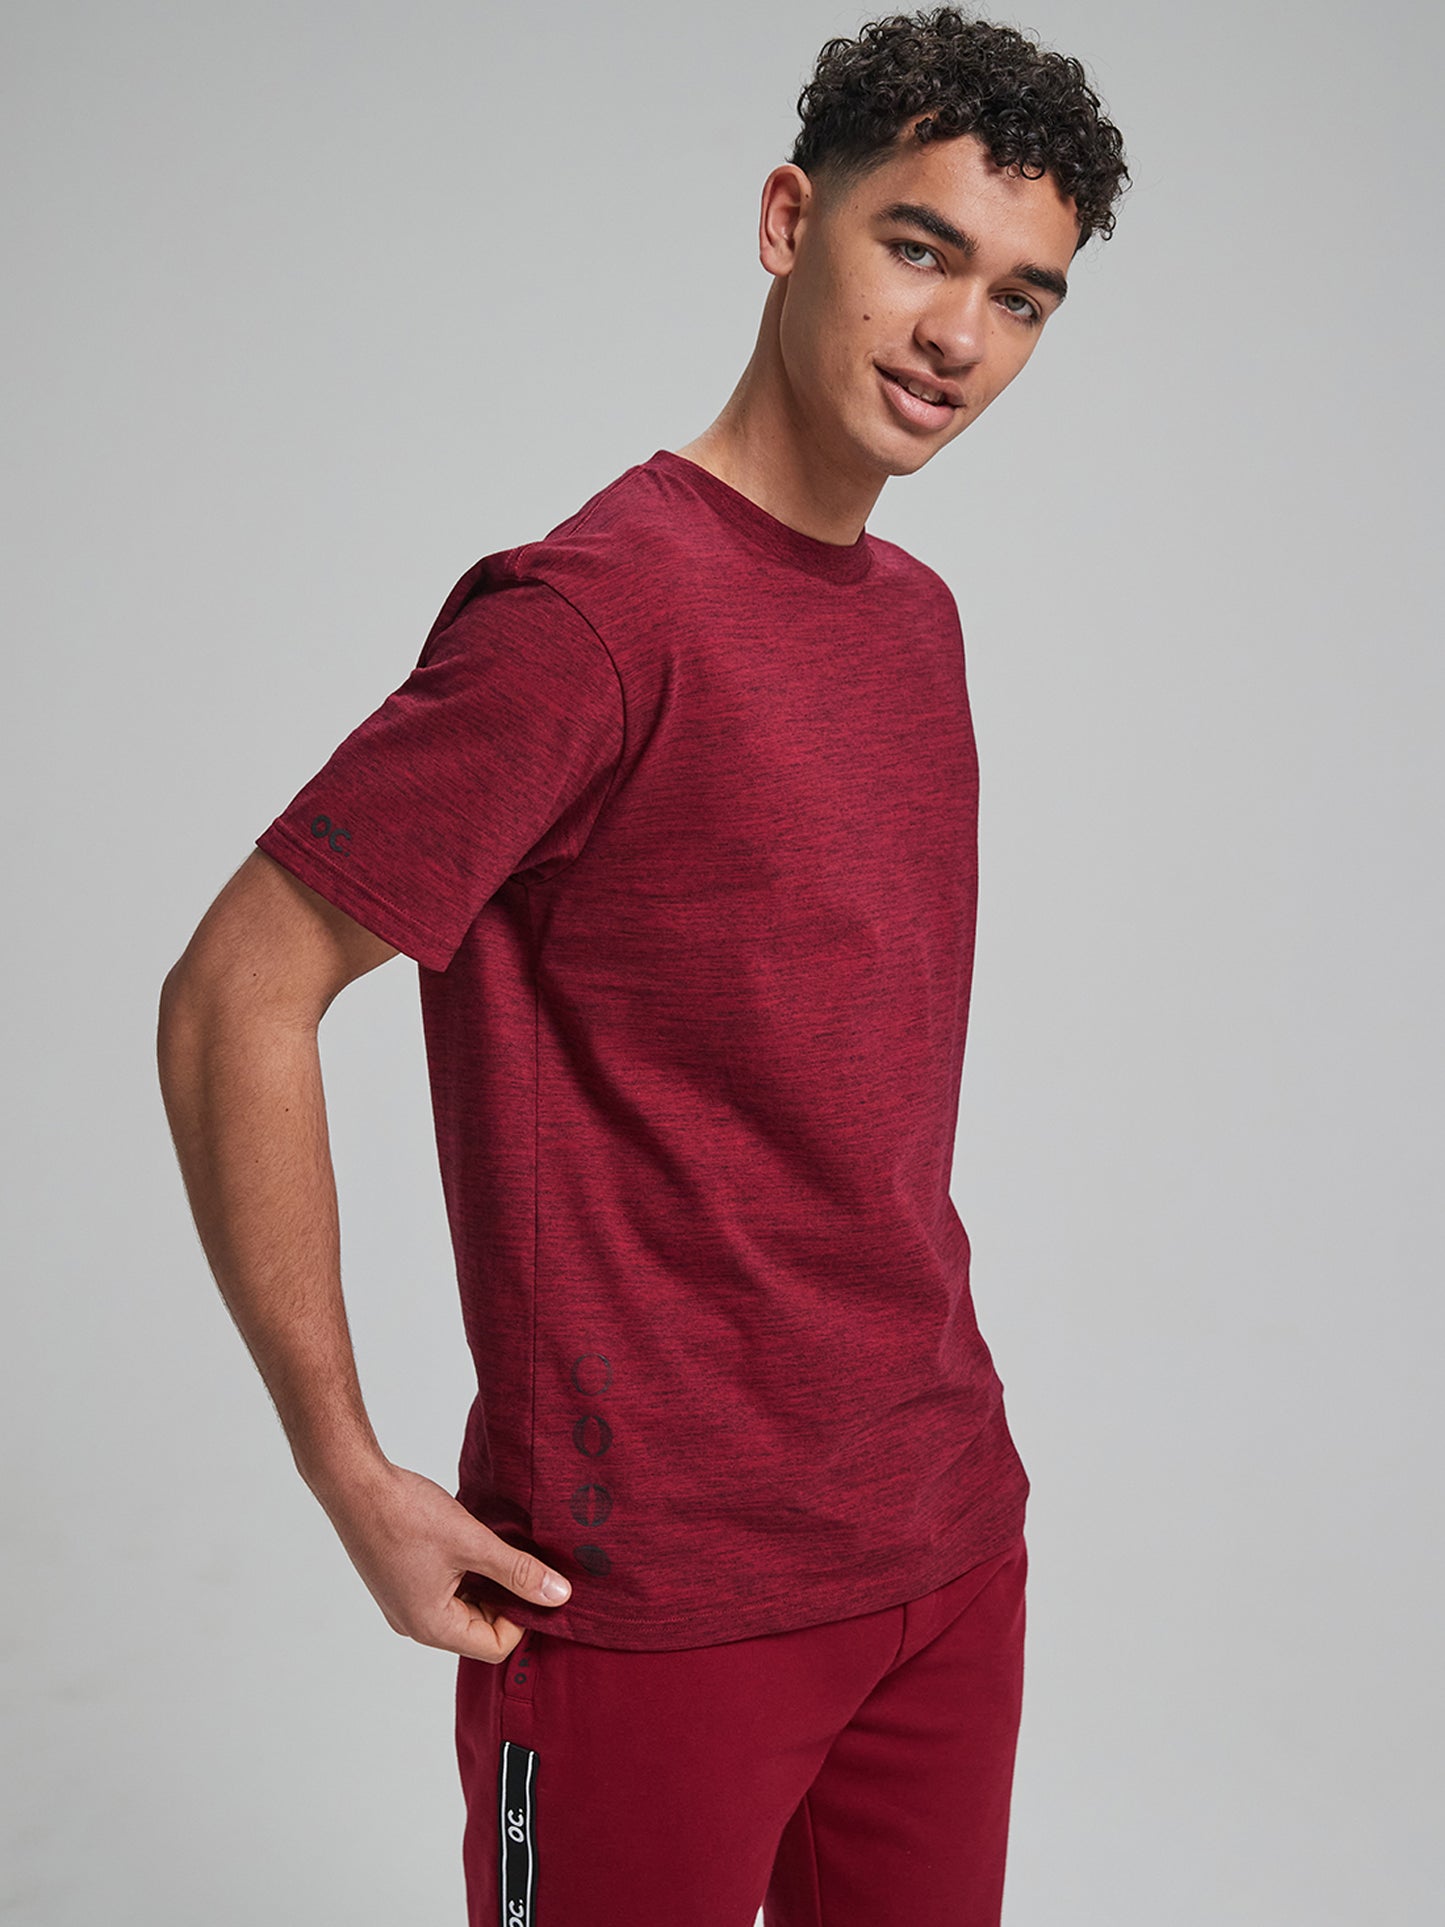 Track Target T-Shirt - Cranberry Red